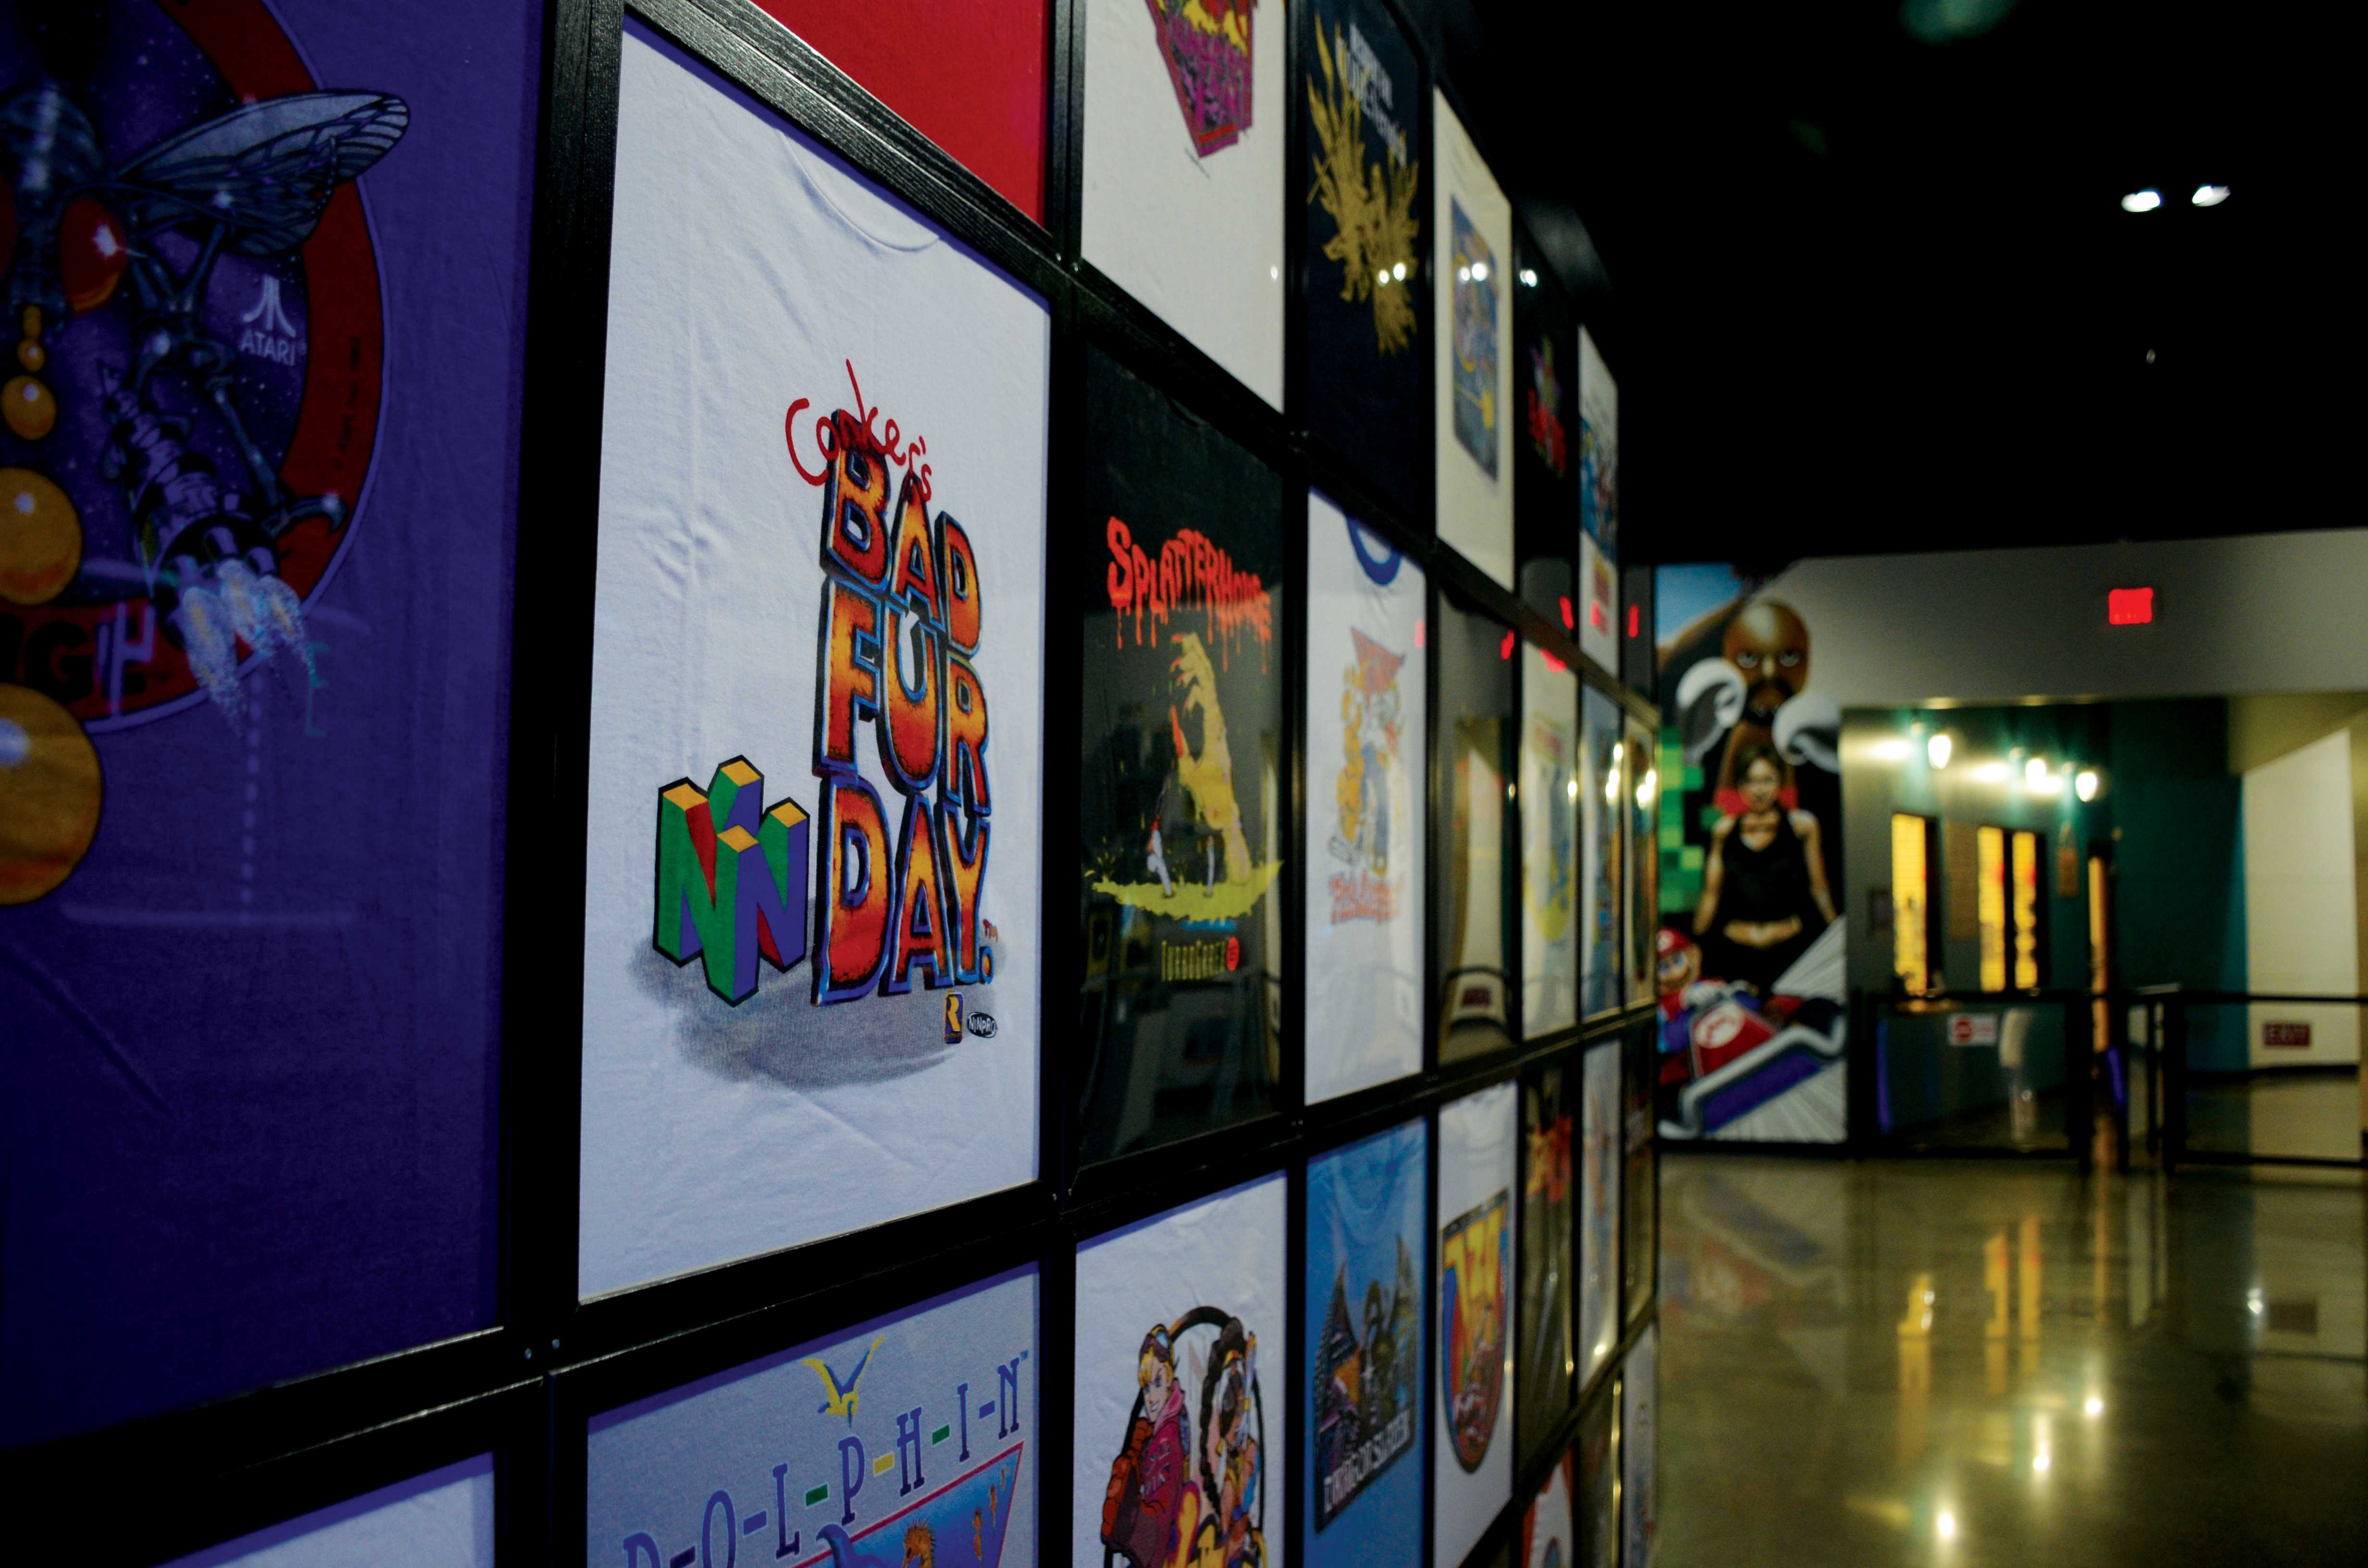 A grid of vintage video game T-shirts hang on a wall in the museum.